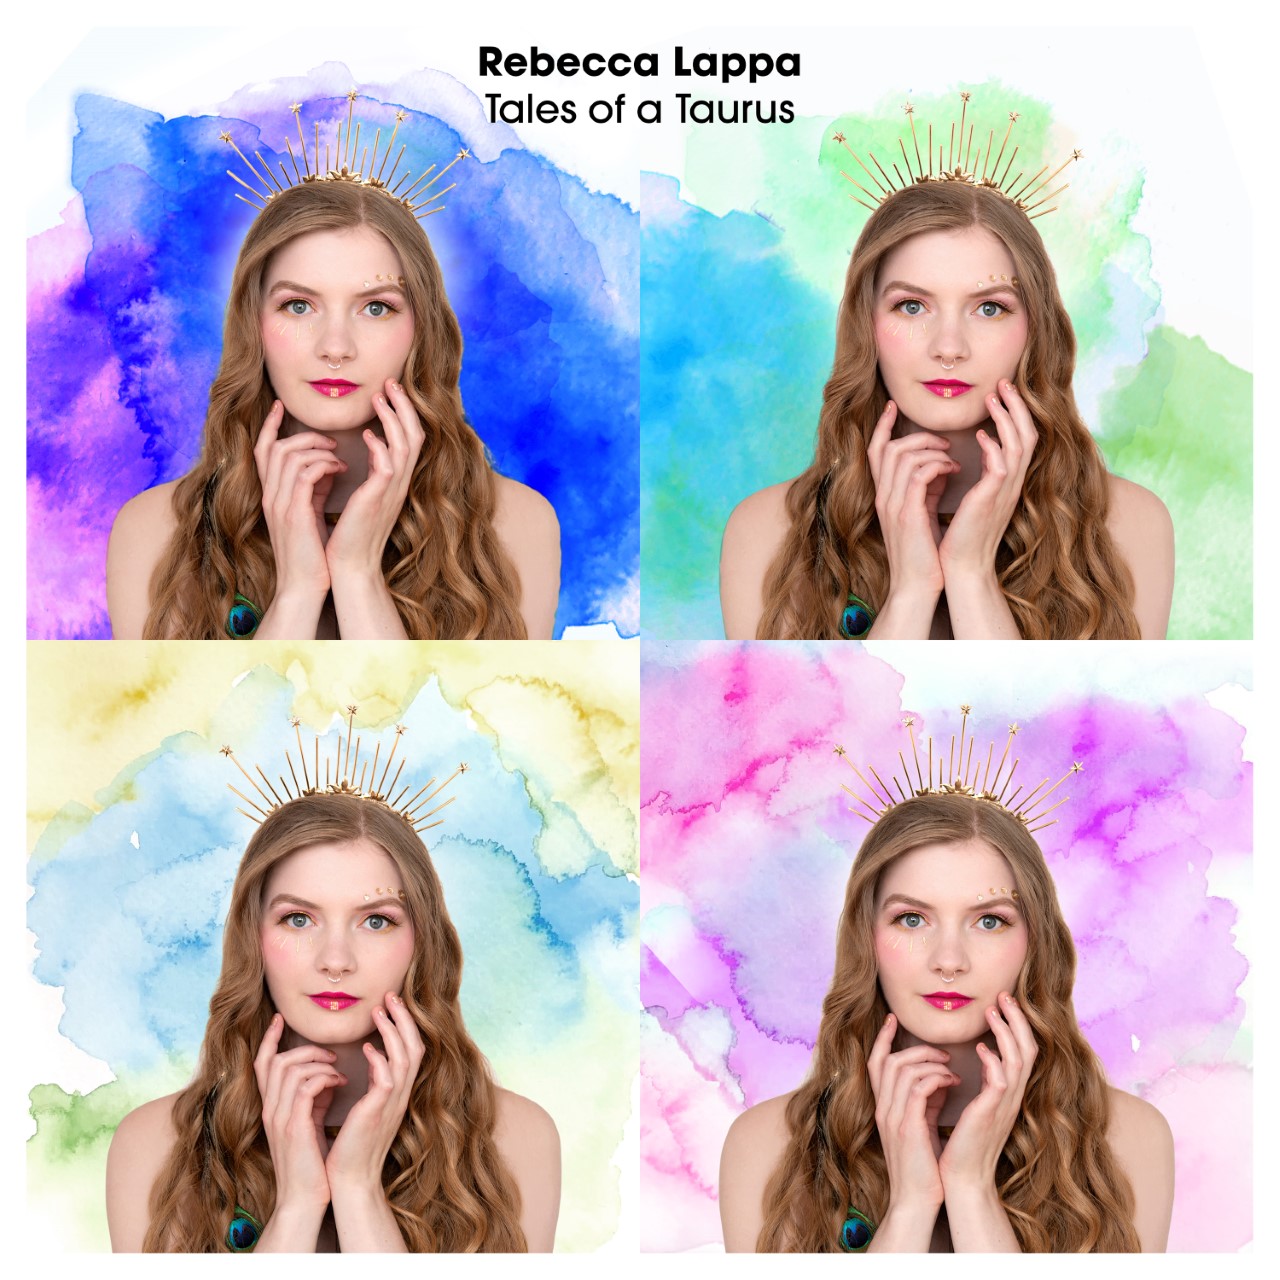 EP REVIEW: Tales of a Taurus by Rebecca Lappa